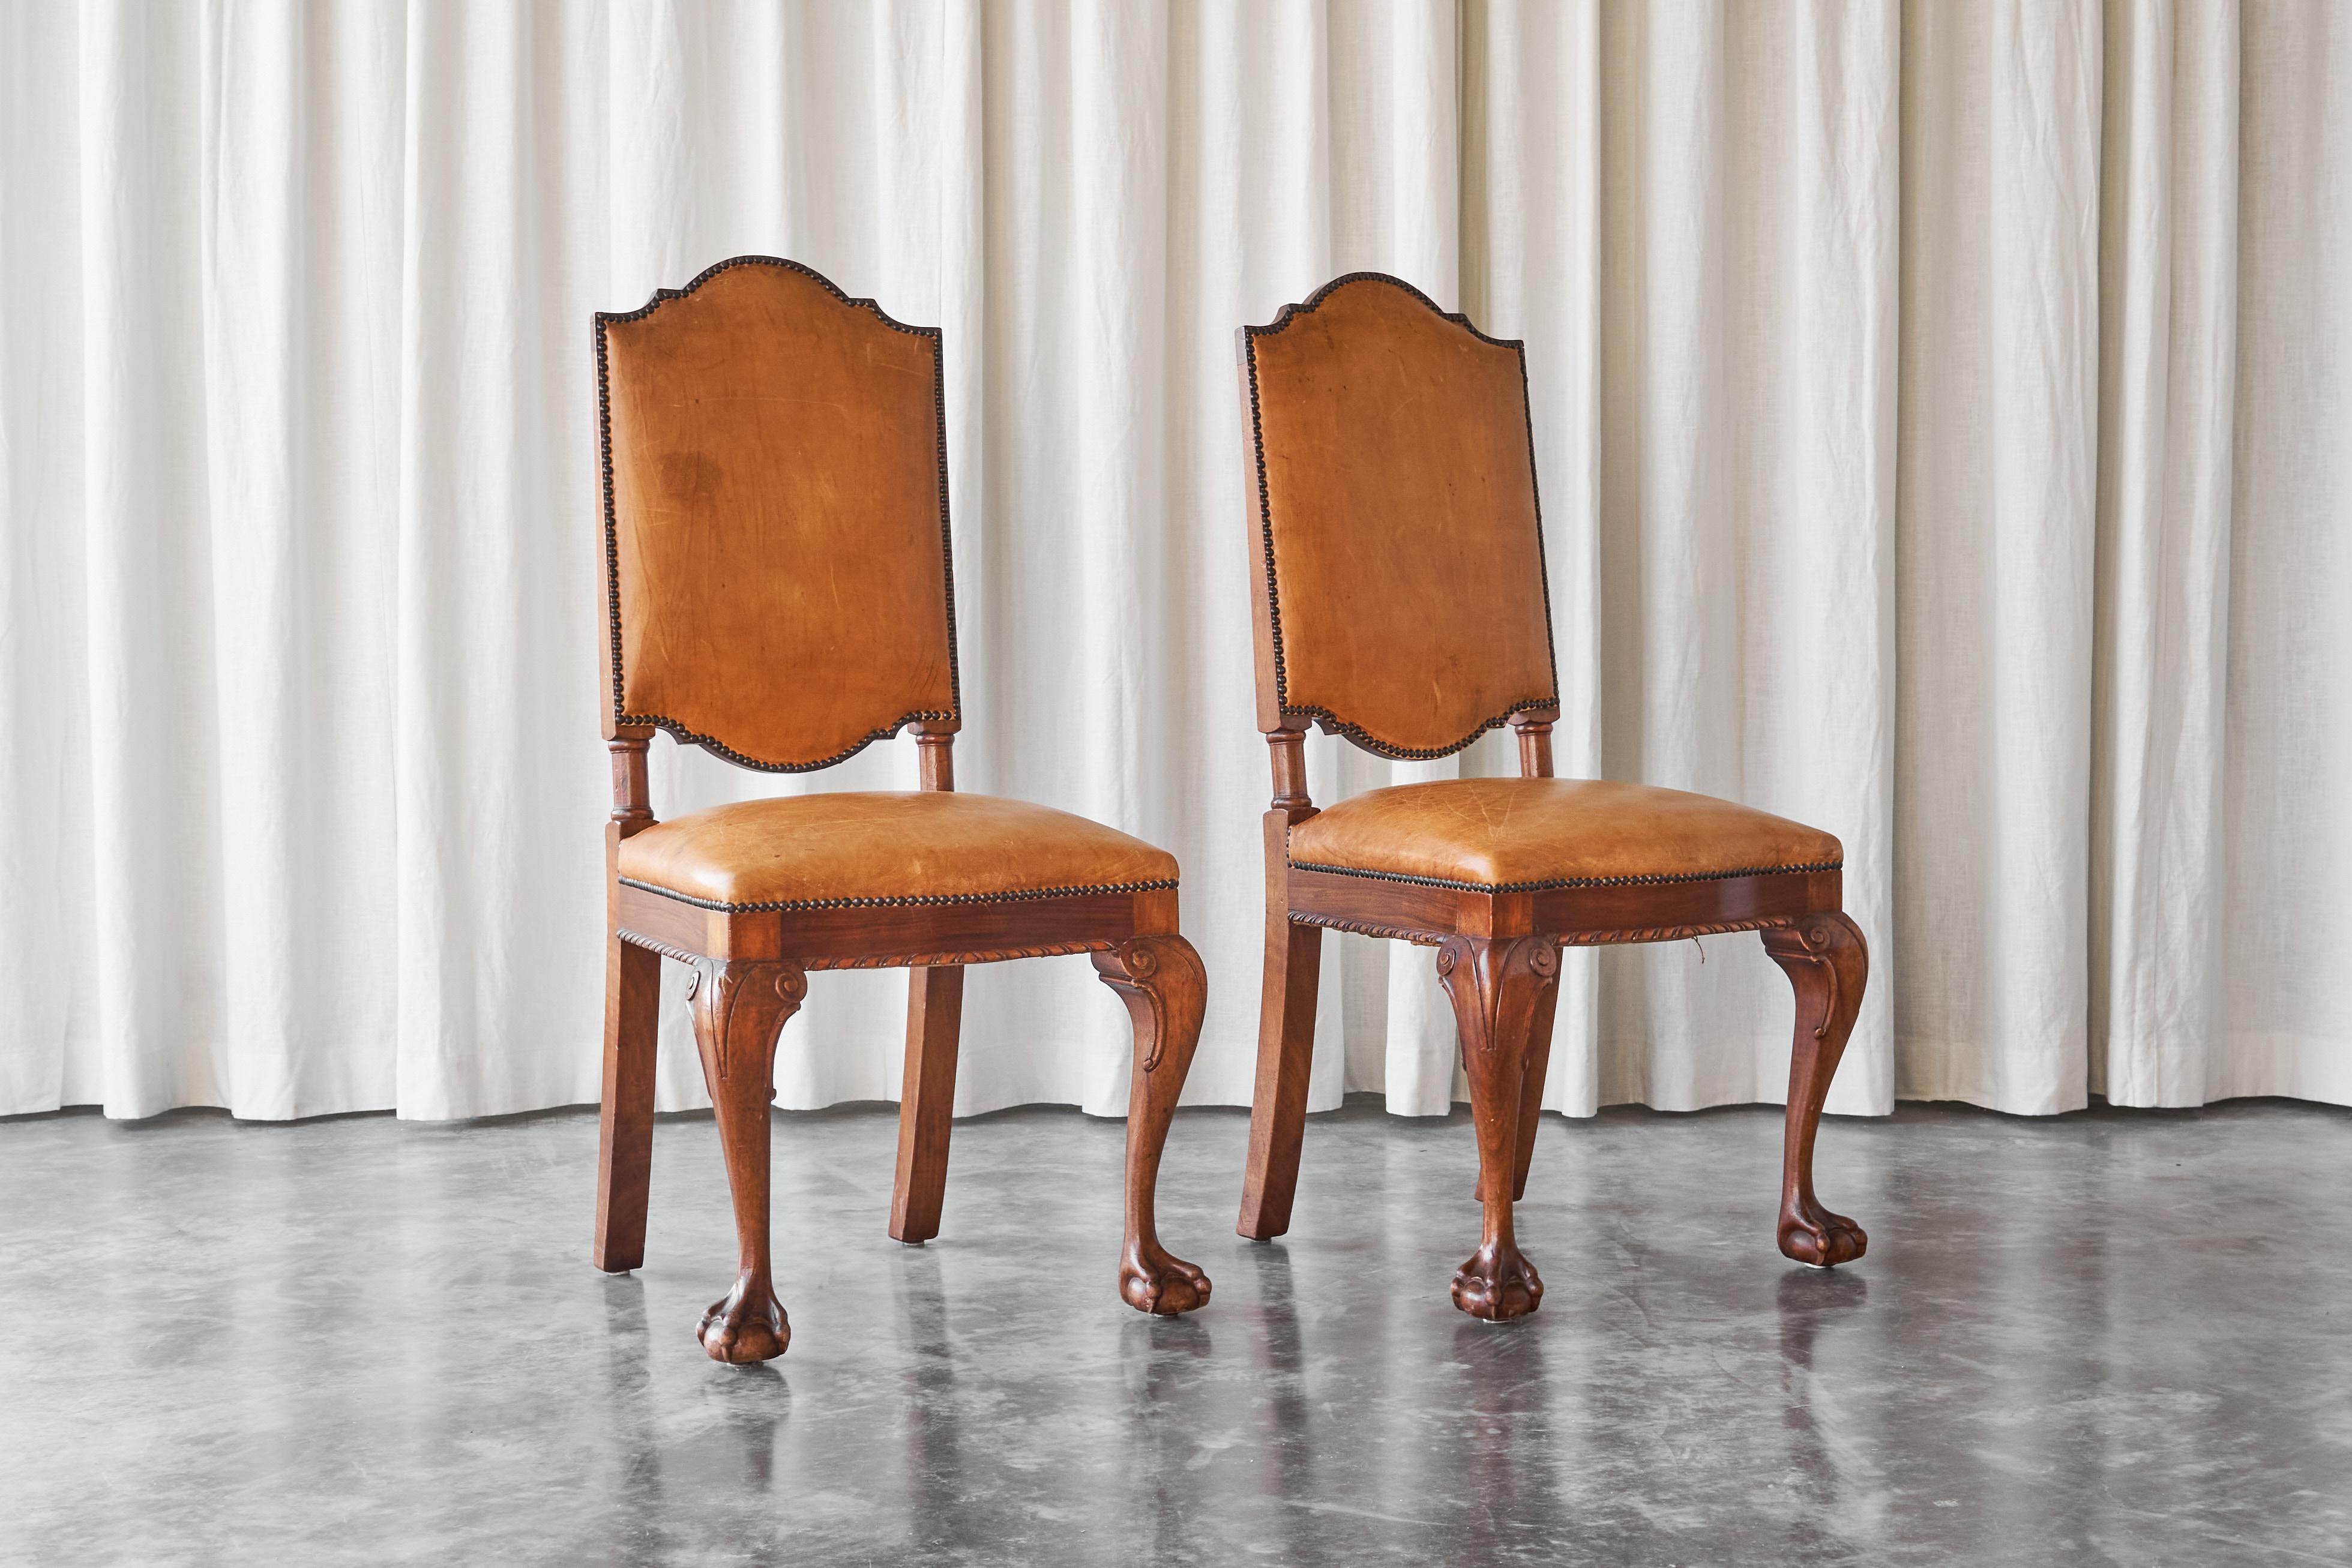 Art Deco 't Woonhuys Amsterdam Rare Pair of Side Chairs in Patinated Cognac Leather 1920s For Sale